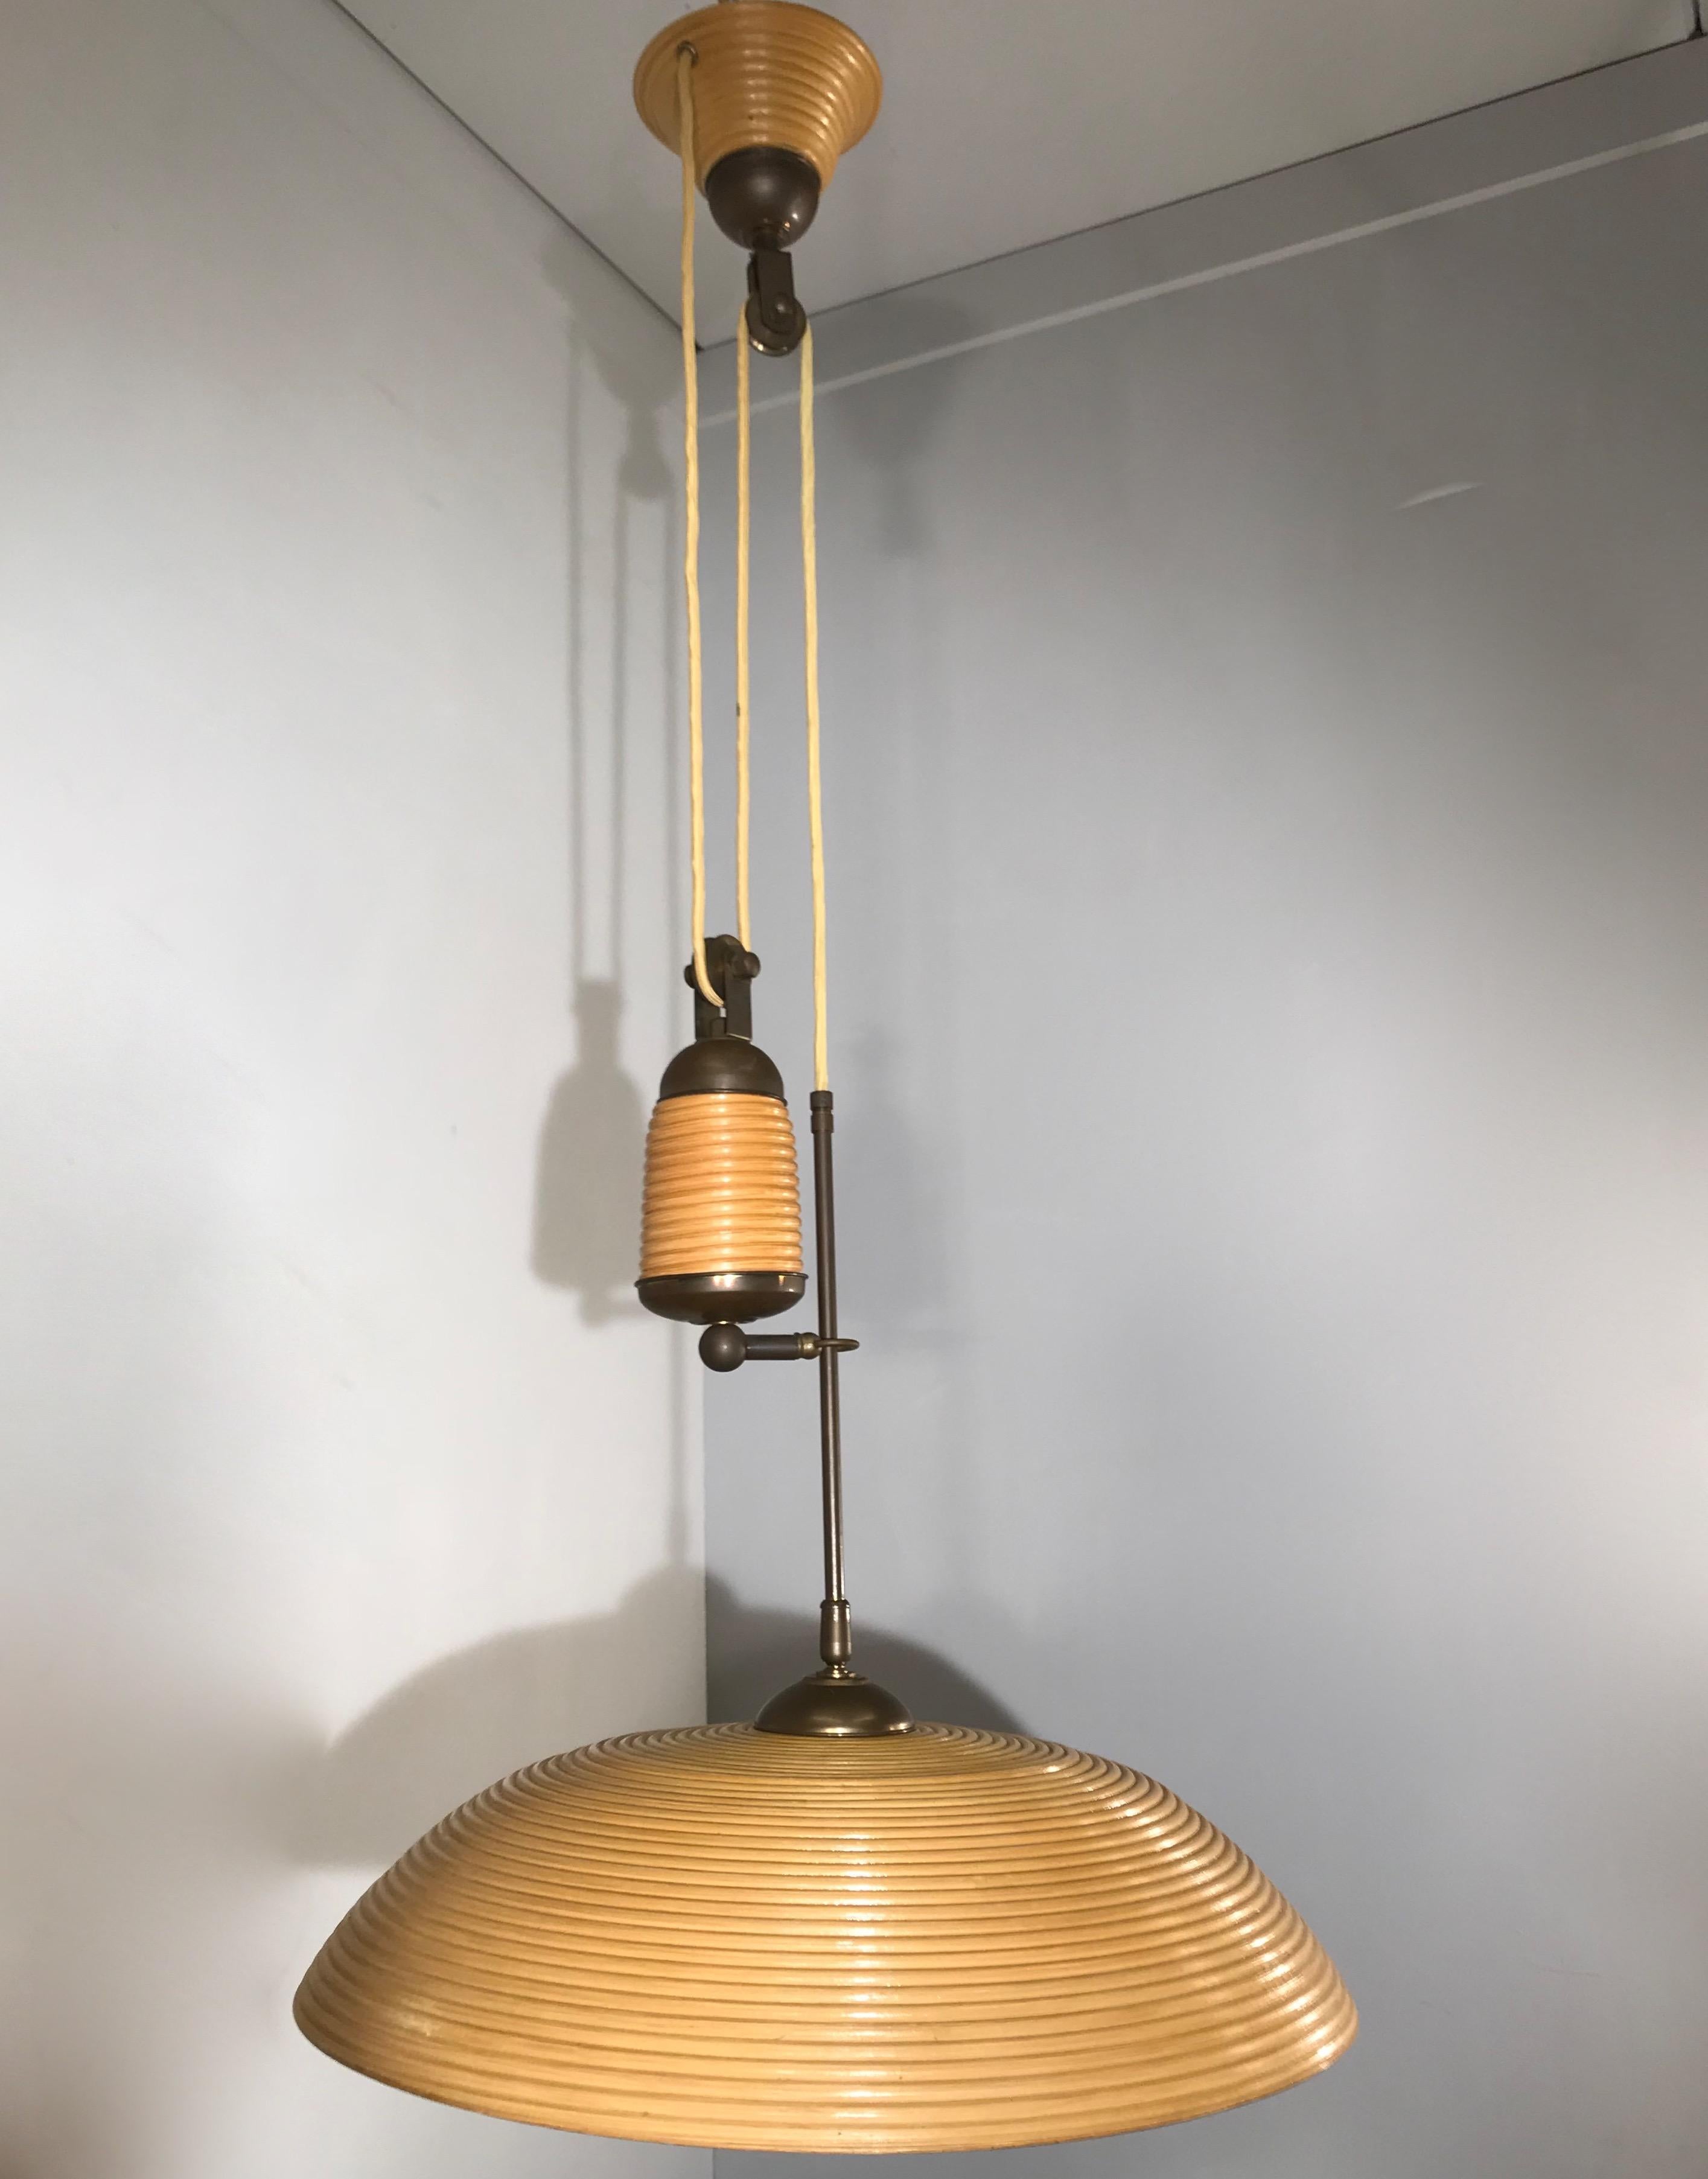 Rare and Handcrafted Mid-Century Modern Rattan and Brass Pendant Light, Lamp 4